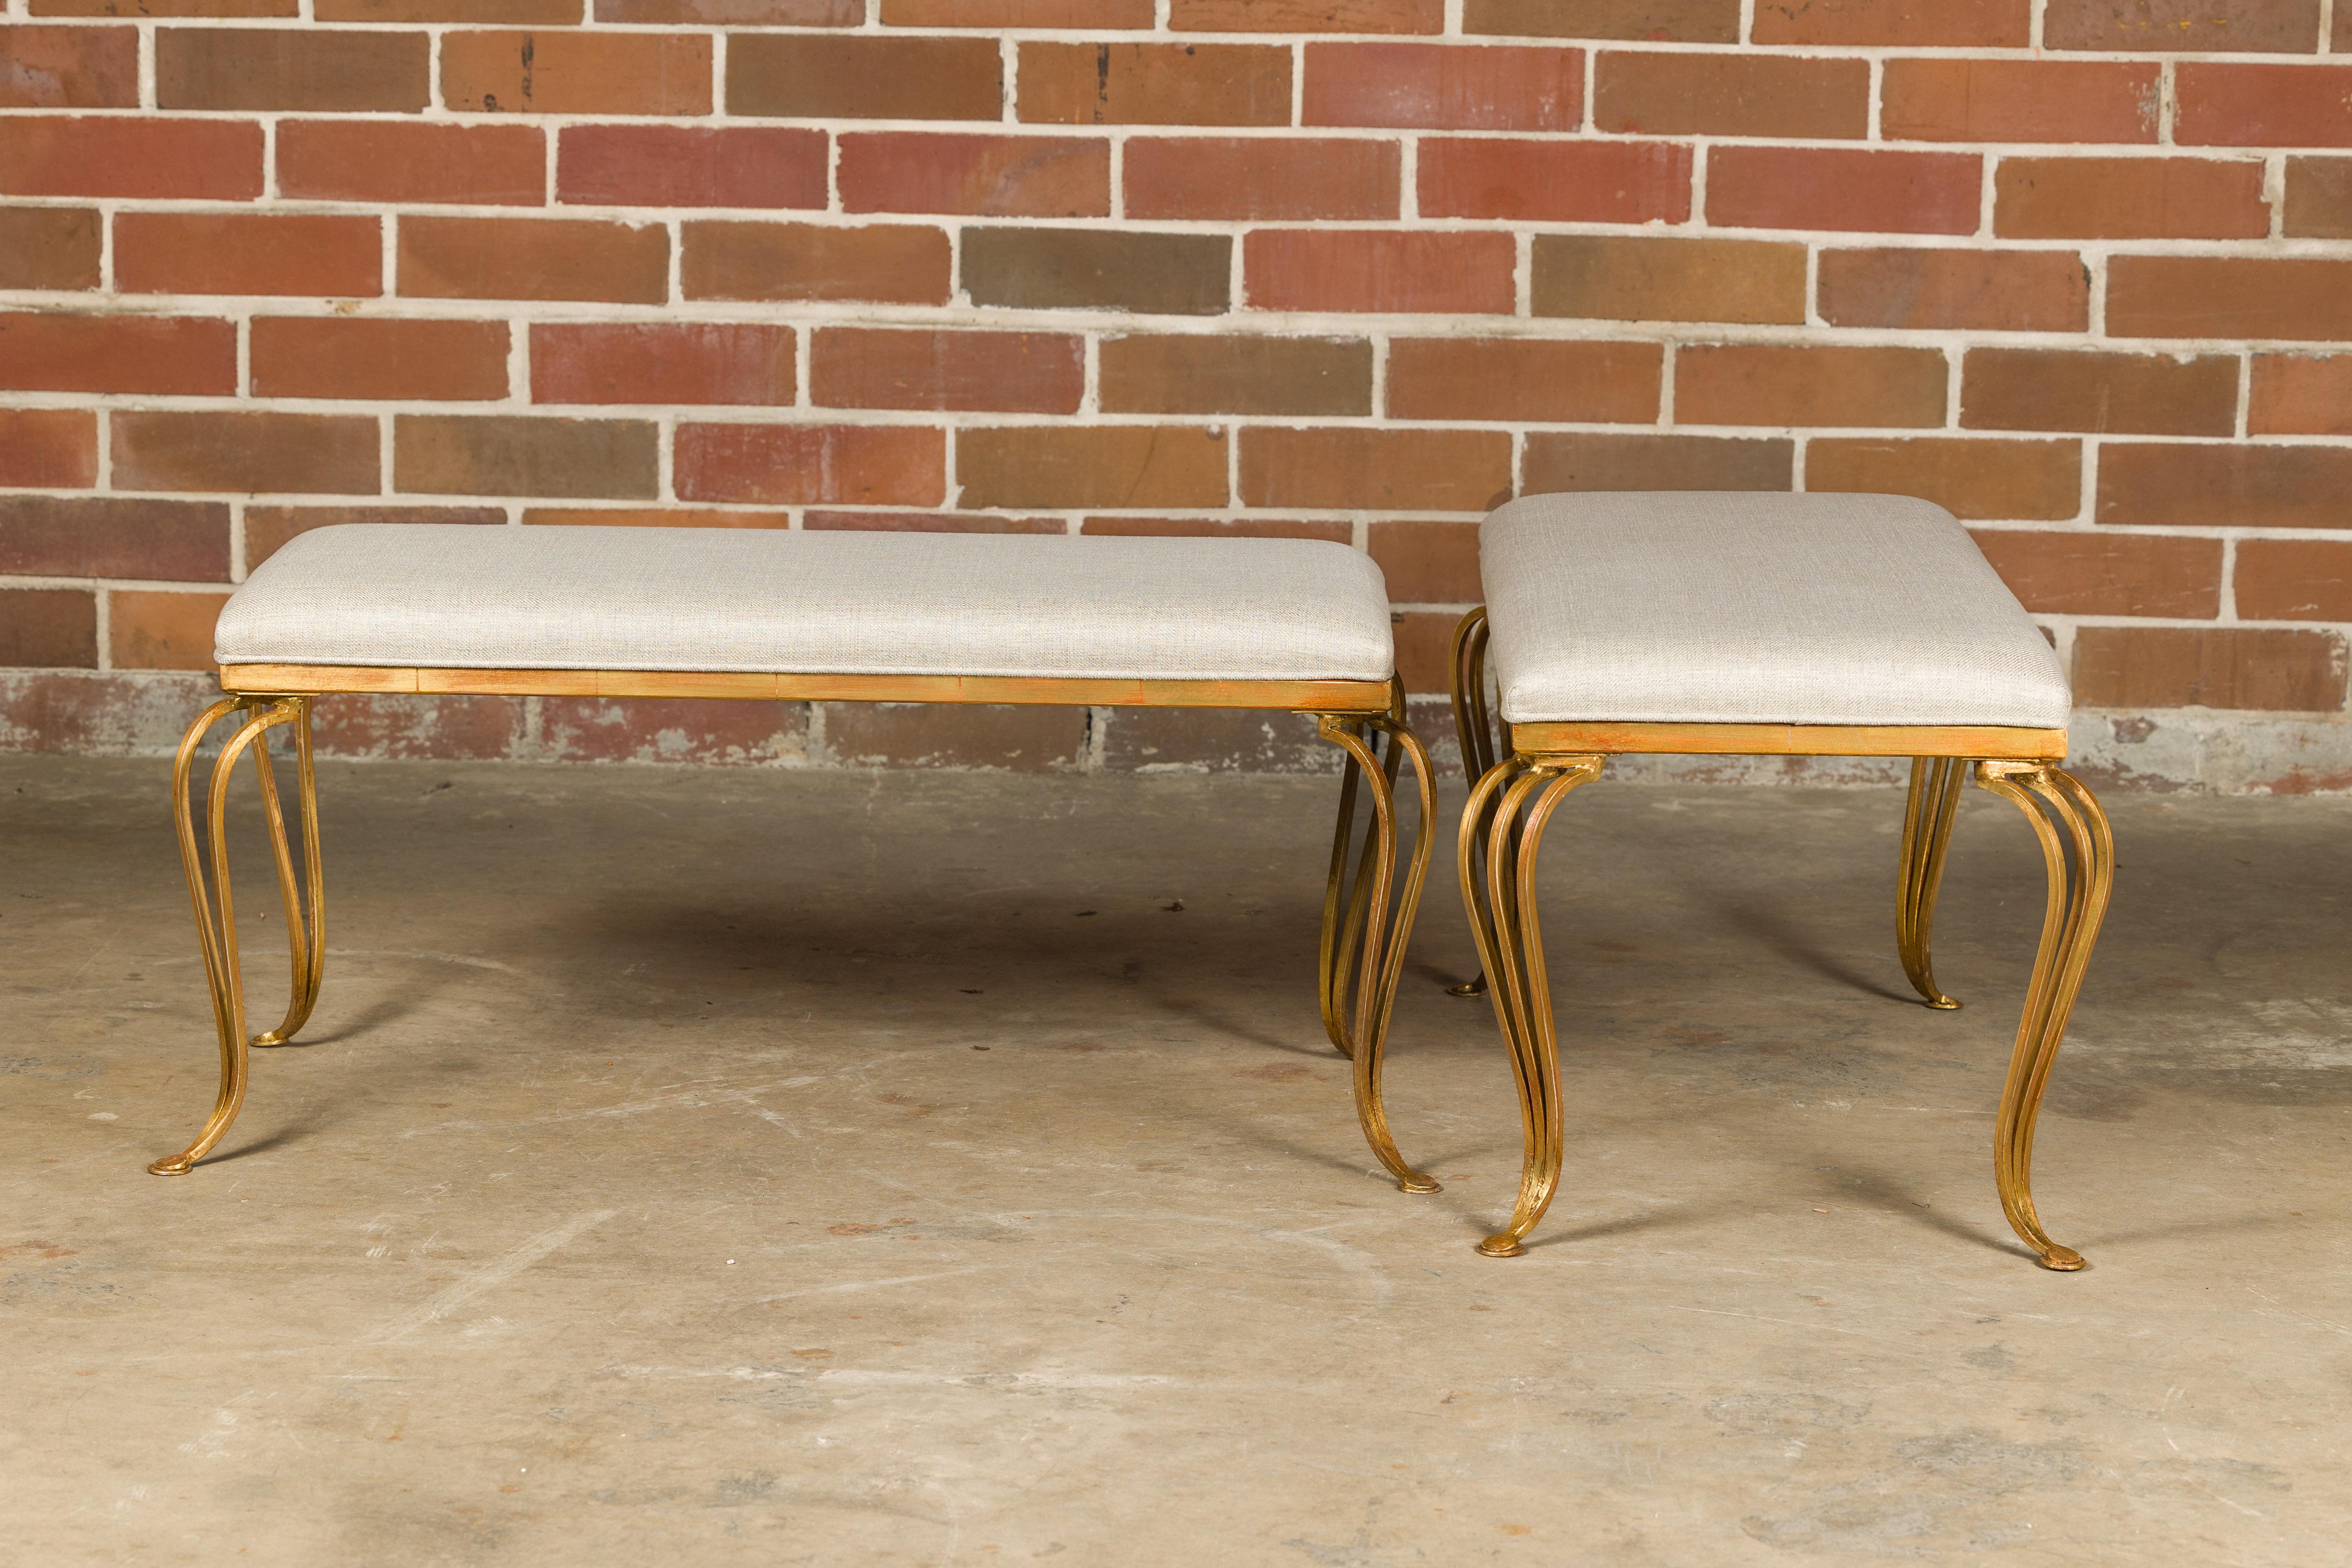 Midcentury French Gilt Metal Benches with Cabriole Legs and Upholstery, a Pair For Sale 1